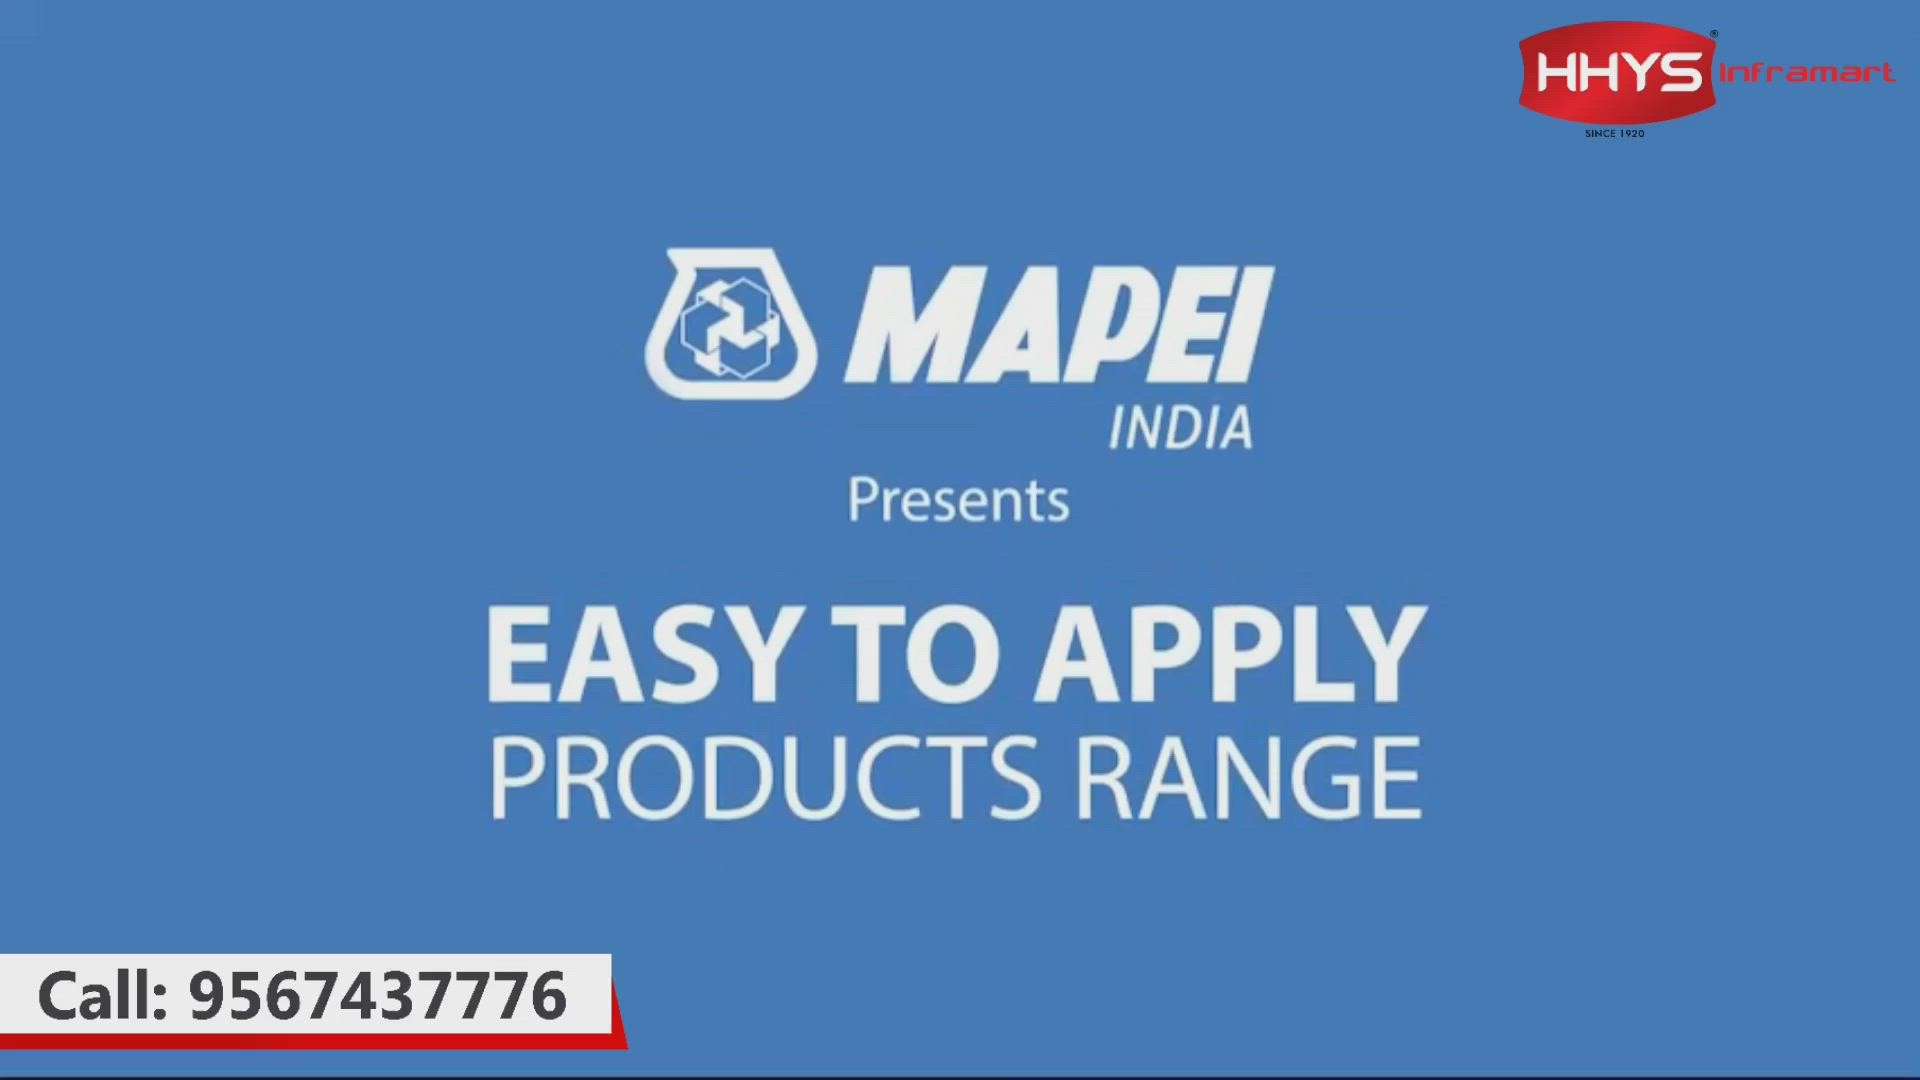 ✅ Mapei - Mapeplast Super

MAPEI India, a market leader in the manufacturing and distribution of construction chemical products, is pleased to present the "Easy to Apply" product line. The first list of products has been picked in such a way that you can apply these products yourself for the problems that are commonly encountered in every house, due to their easy availability and small packaging, as well as the benefit of the "do it yourself" approach.

Visit our HHYS Inframart showroom in Kayamkulam for more details.

𝖧𝖧𝖸𝖲 𝖨𝗇𝖿𝗋𝖺𝗆𝖺𝗋𝗍
𝖬𝗎𝗄𝗄𝖺𝗏𝖺𝗅𝖺 𝖩𝗇 , 𝖪𝖺𝗒𝖺𝗆𝗄𝗎𝗅𝖺𝗆
𝖠𝗅𝖾𝗉𝗉𝖾𝗒 - 690502

Call us for more Details :
+91 95674 37776.

✉️ info@hhys.in

🌐 https://hhys.in/

✔️ Whatsapp Now : https://wa.me/+919567437776

#hhys #hhysinframart #buildingmaterials #mapei #WaterProofings